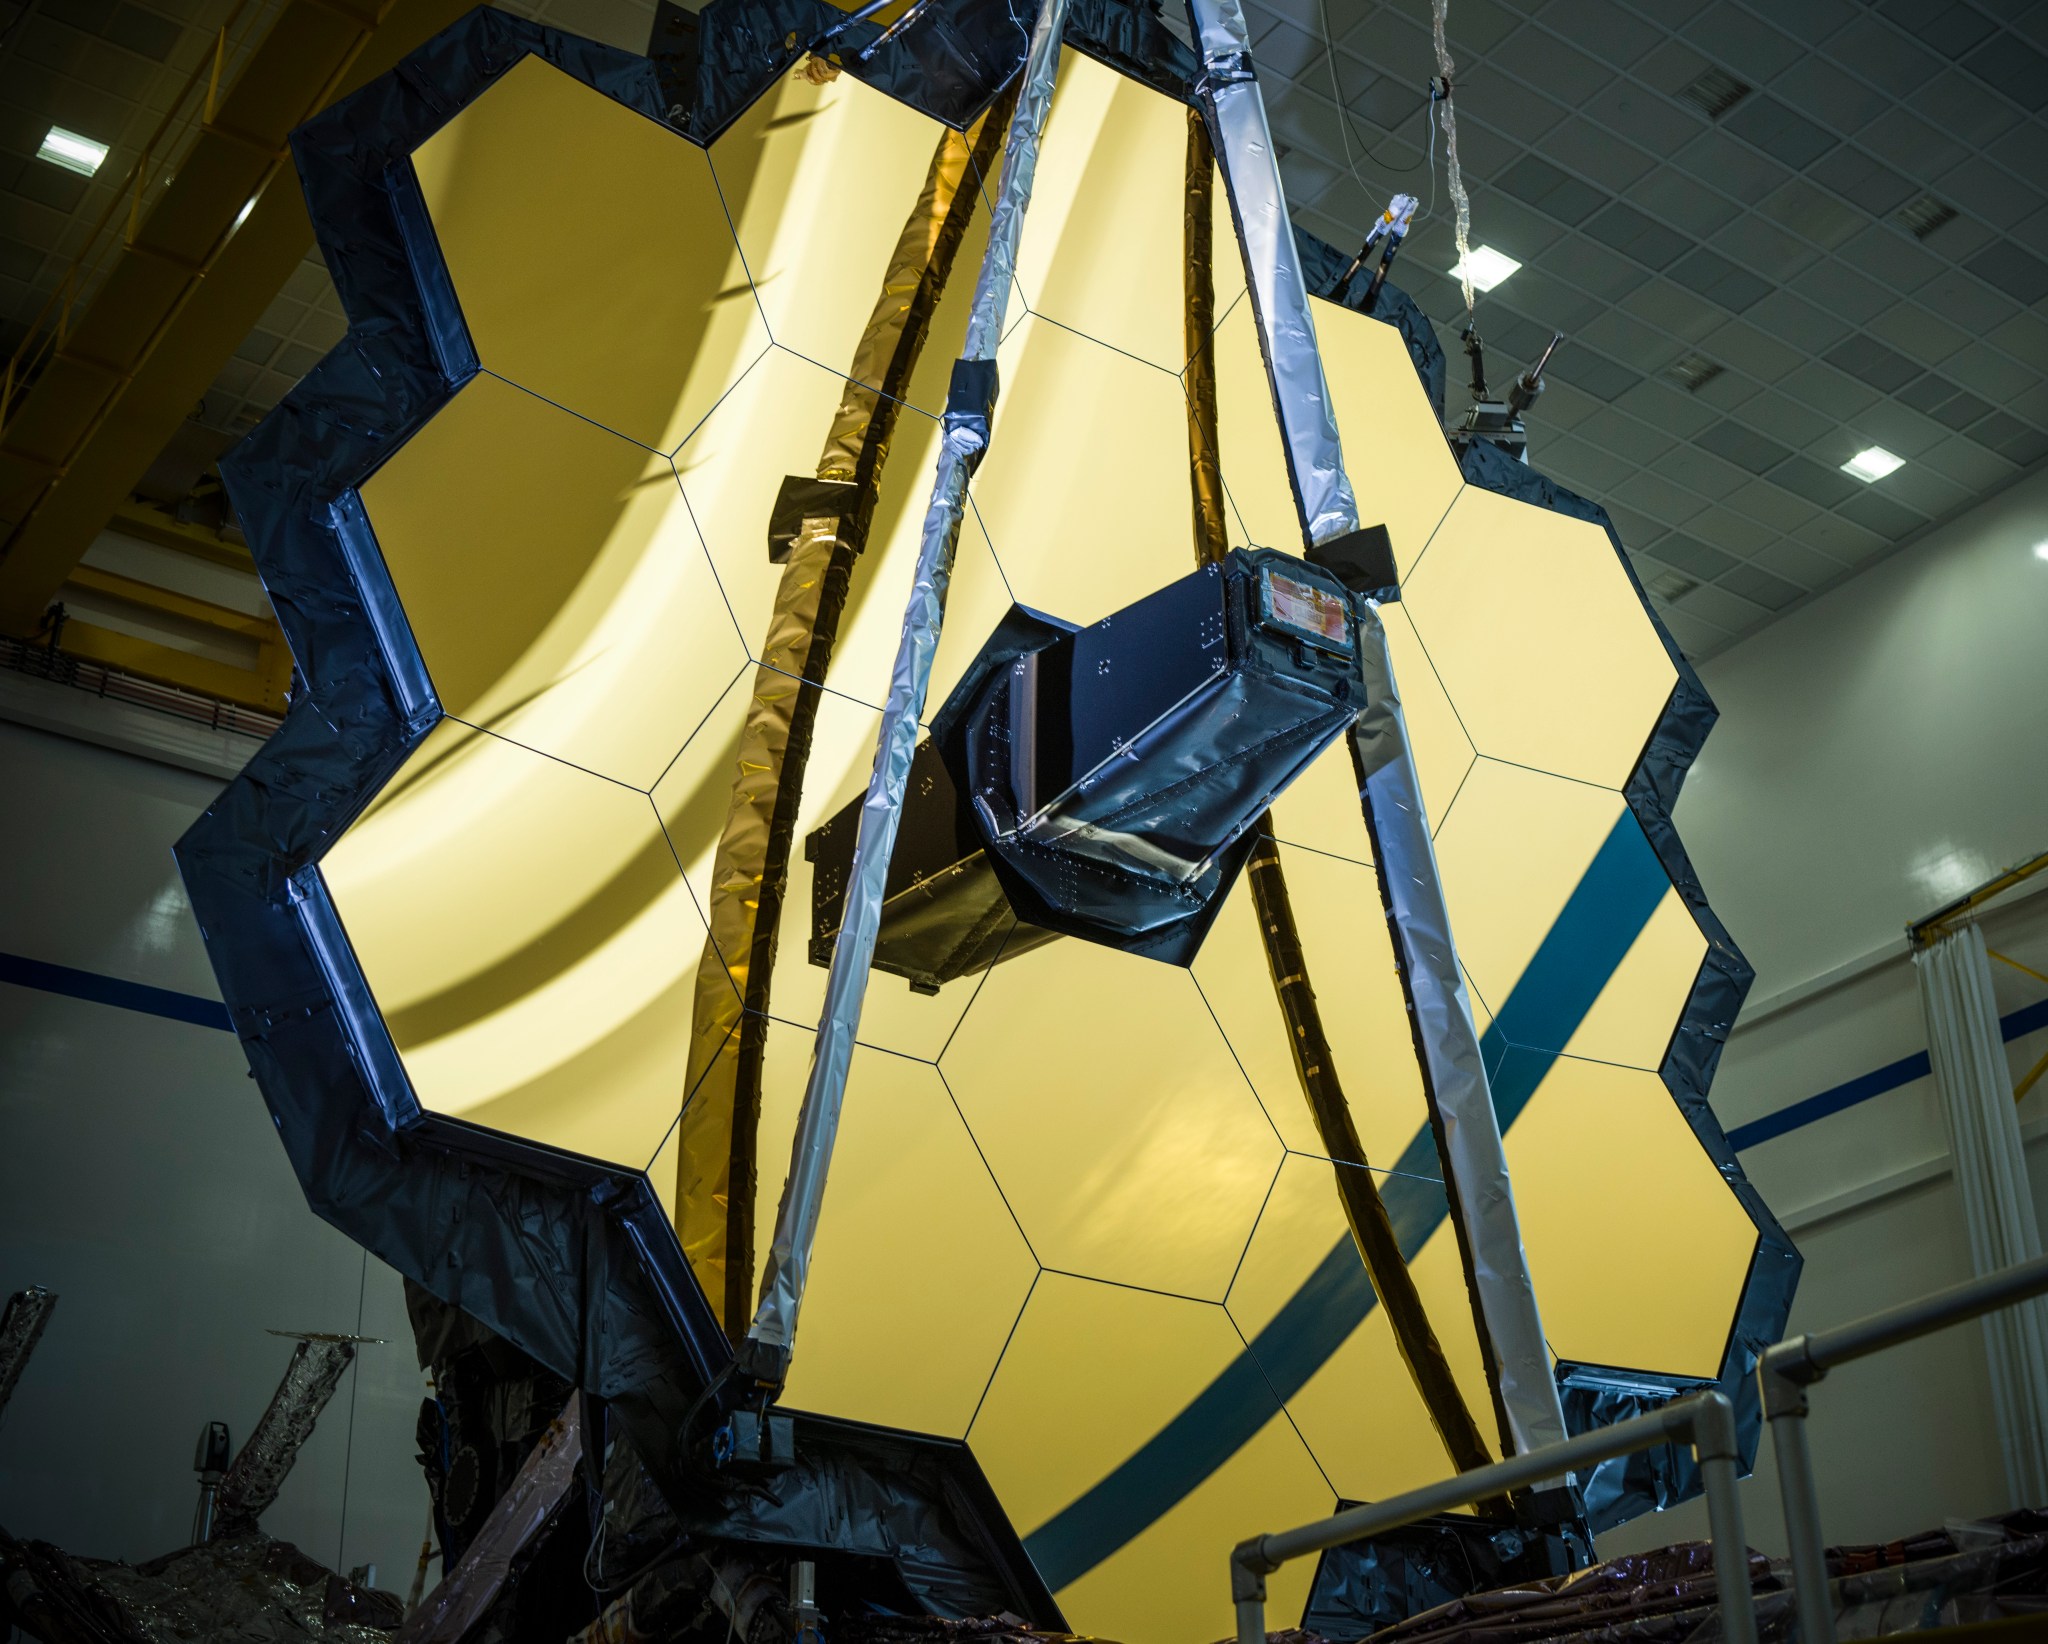 The James Webb Space Telescope, the premier space science observatory of the next decade, is targeted for launch Dec. 24 from Europe's Spaceport in French Guiana, on the northeastern coast of South America.